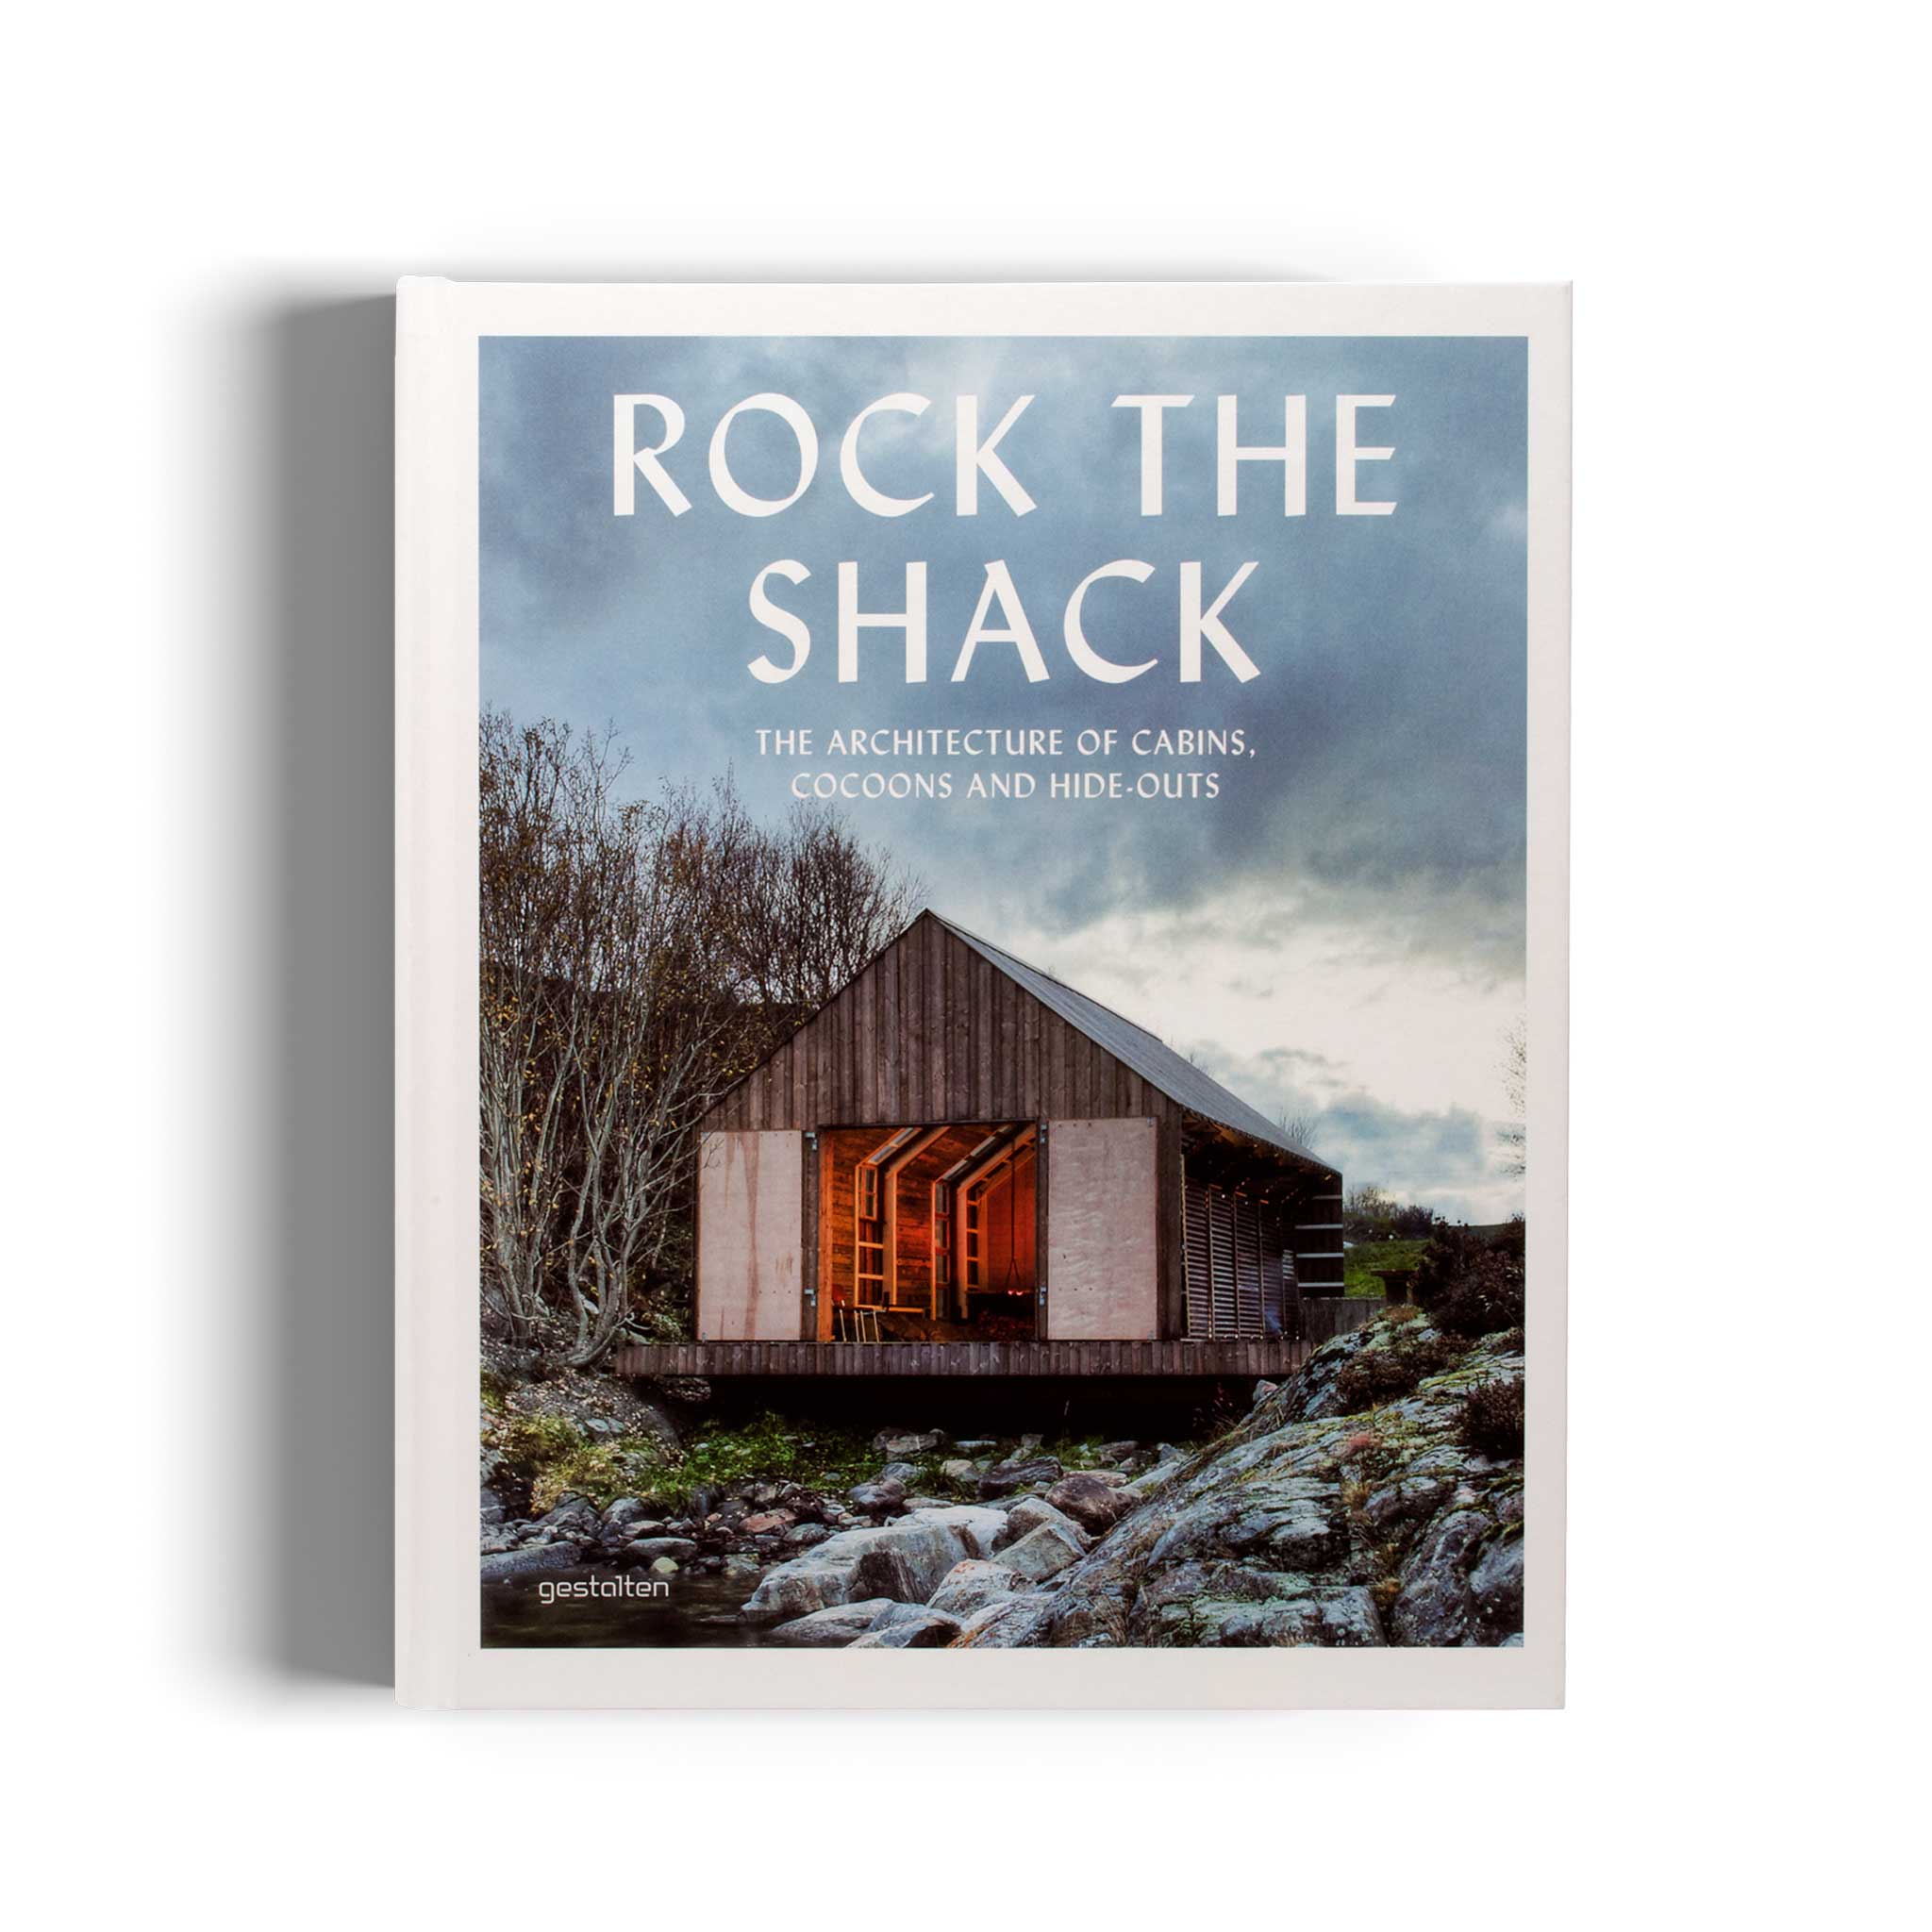 ROCK THE SHACK | Architecture of cabins, cocoons & hide-outs | BOOK |  English | Gestalten Verlag